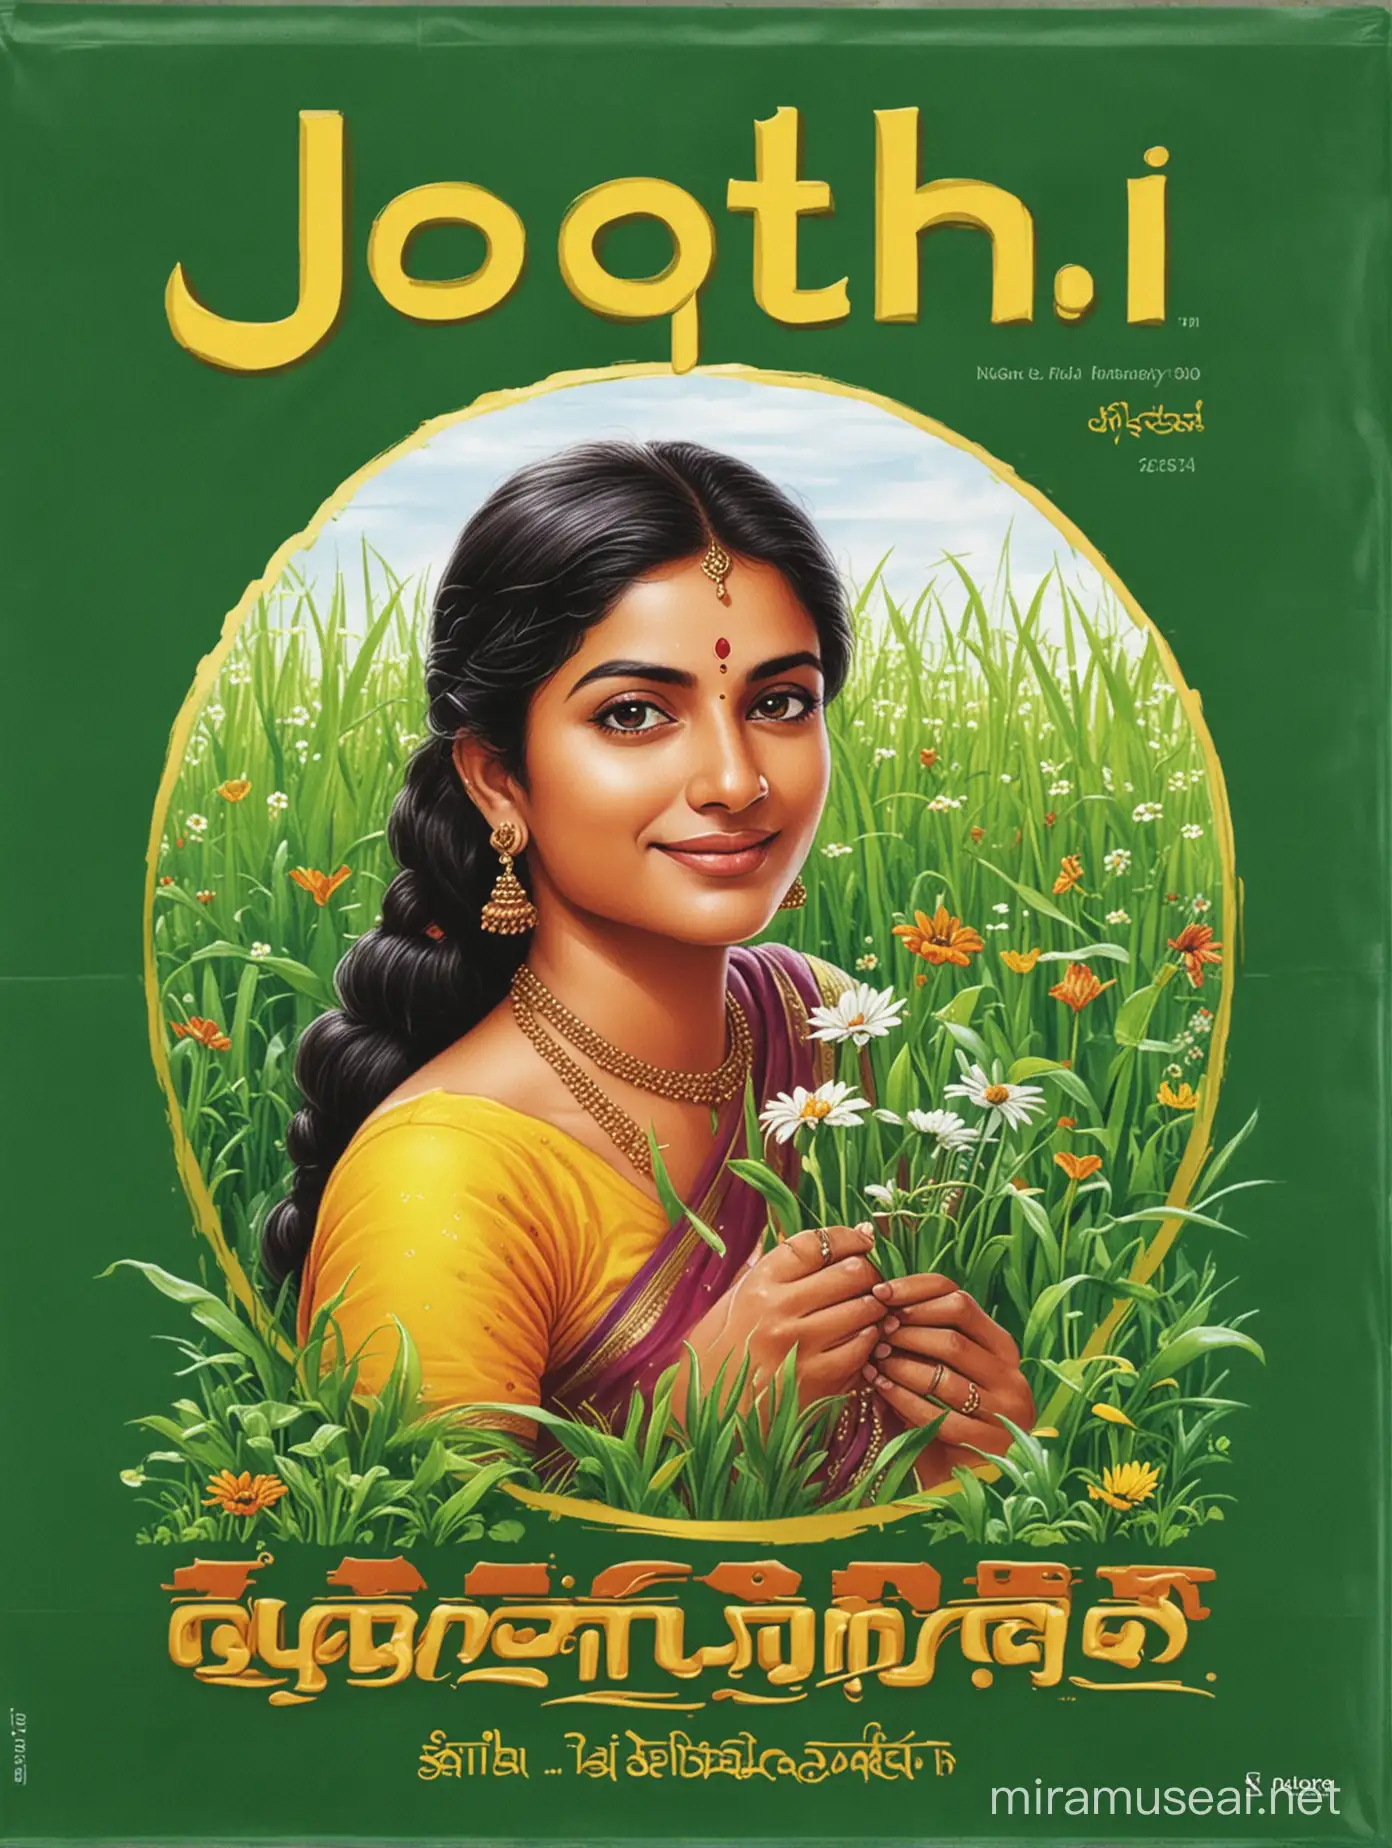 fertilizer cover design with name"JYOTHI"